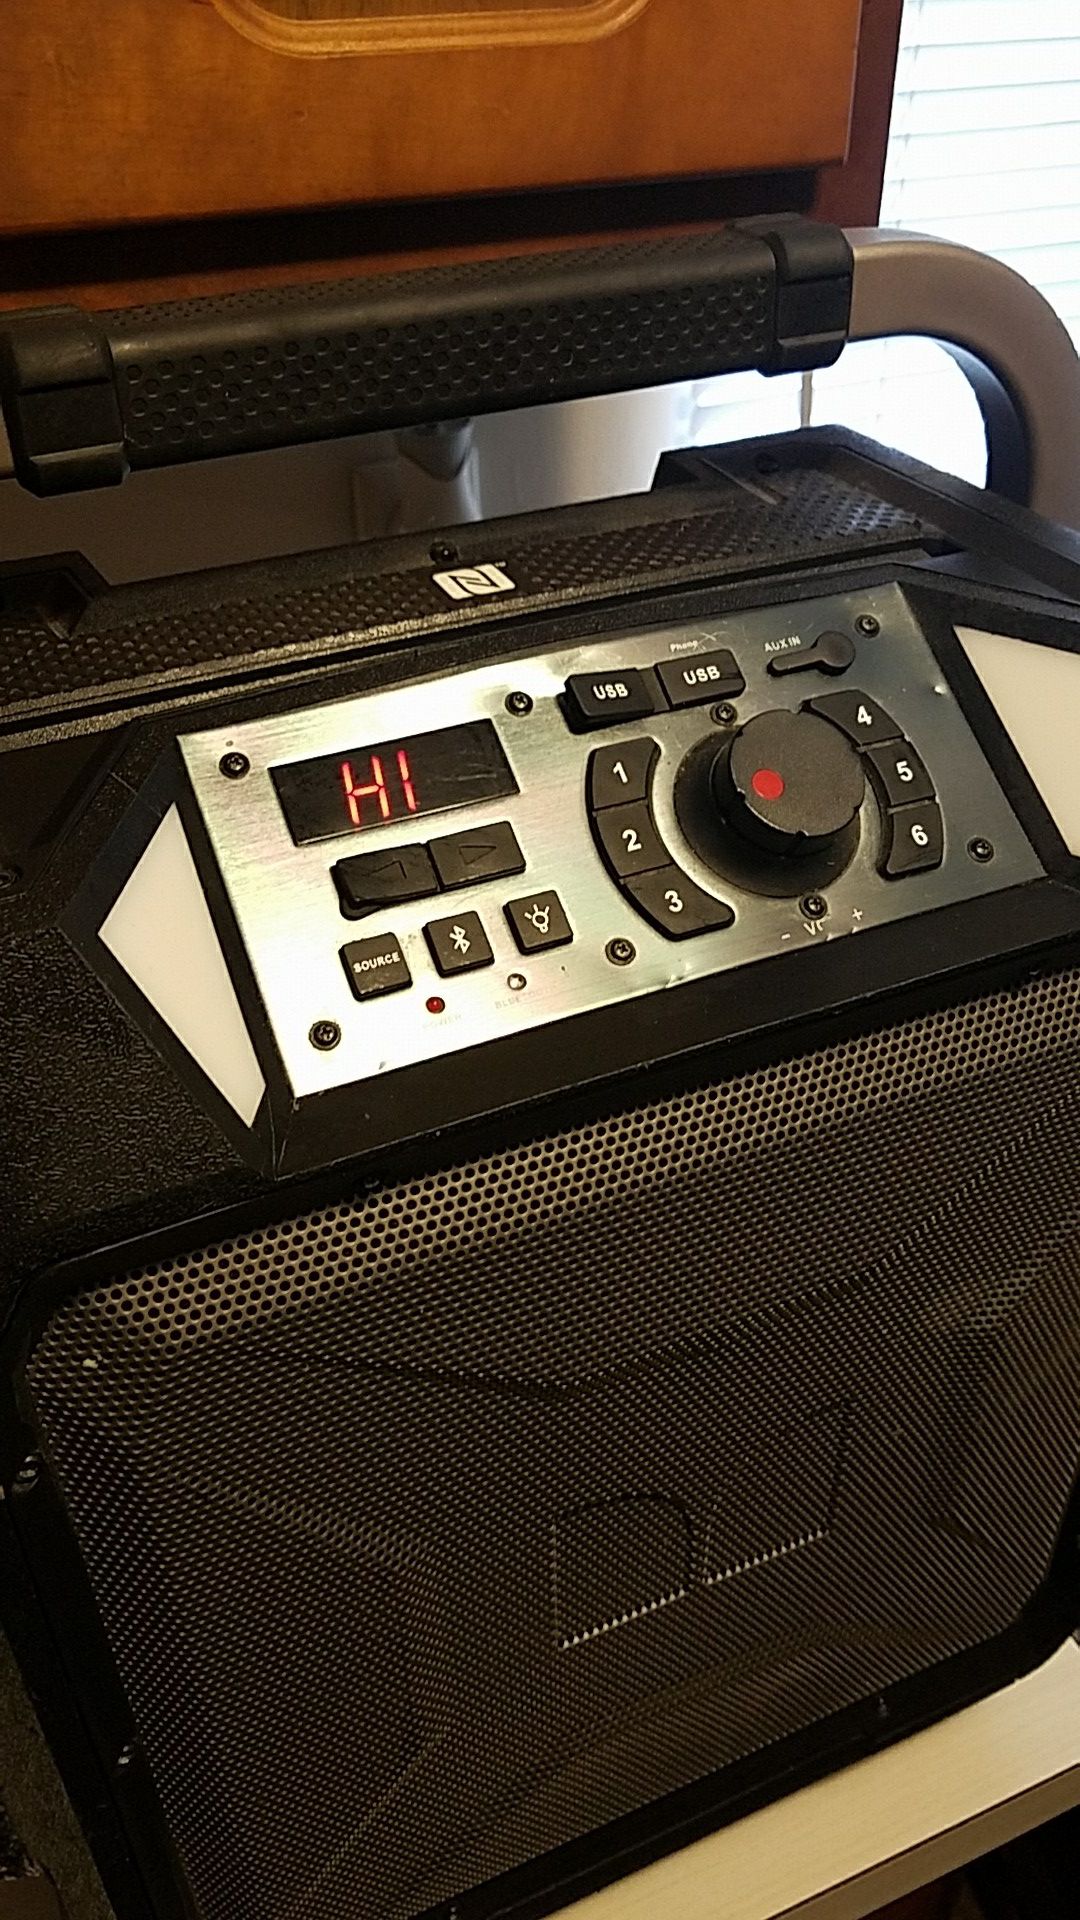 Monster Party Party Box radio with Bluetooth